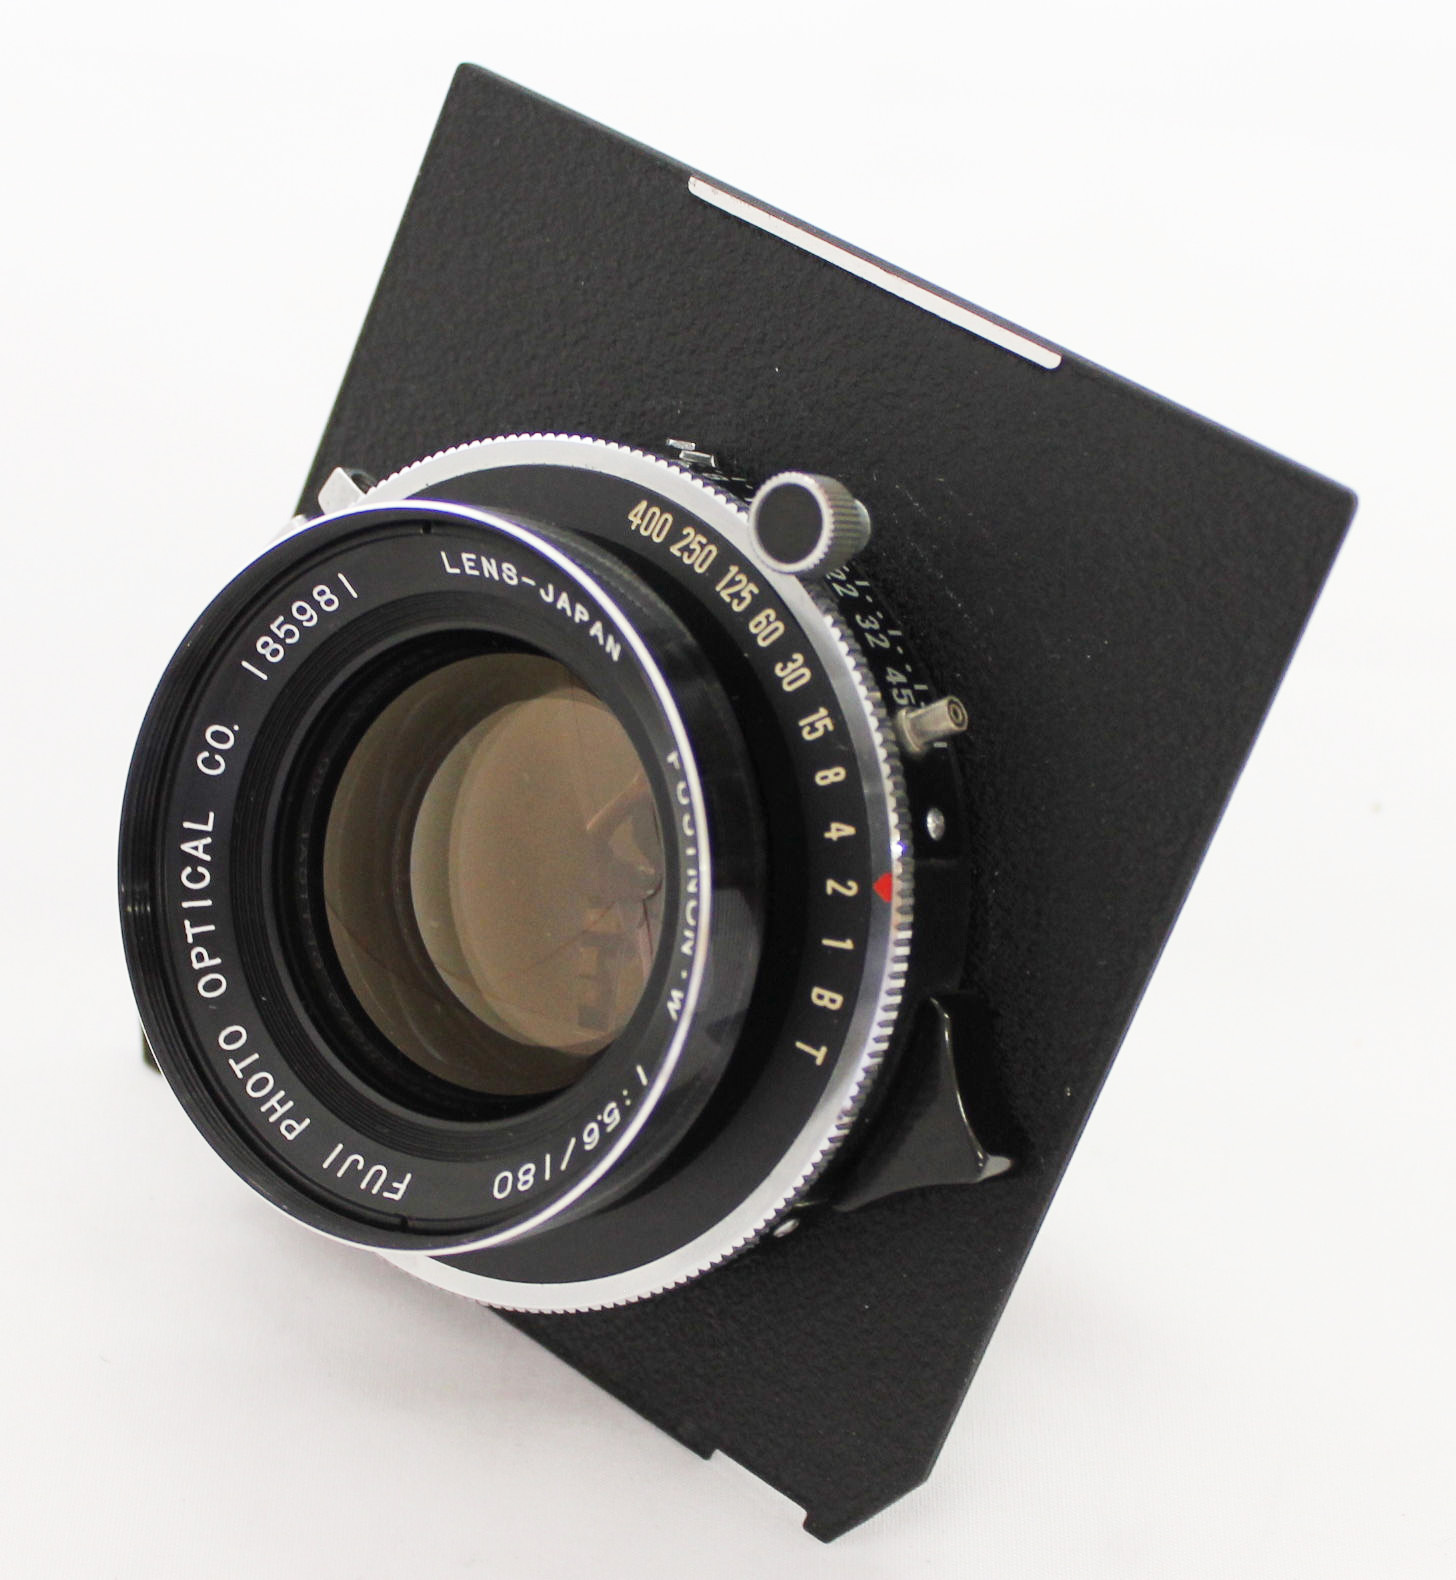 [Excellent++++] Fuji Fujinon W 180mm F/5.6 Large Format Lens with Copal Shutter from Japan